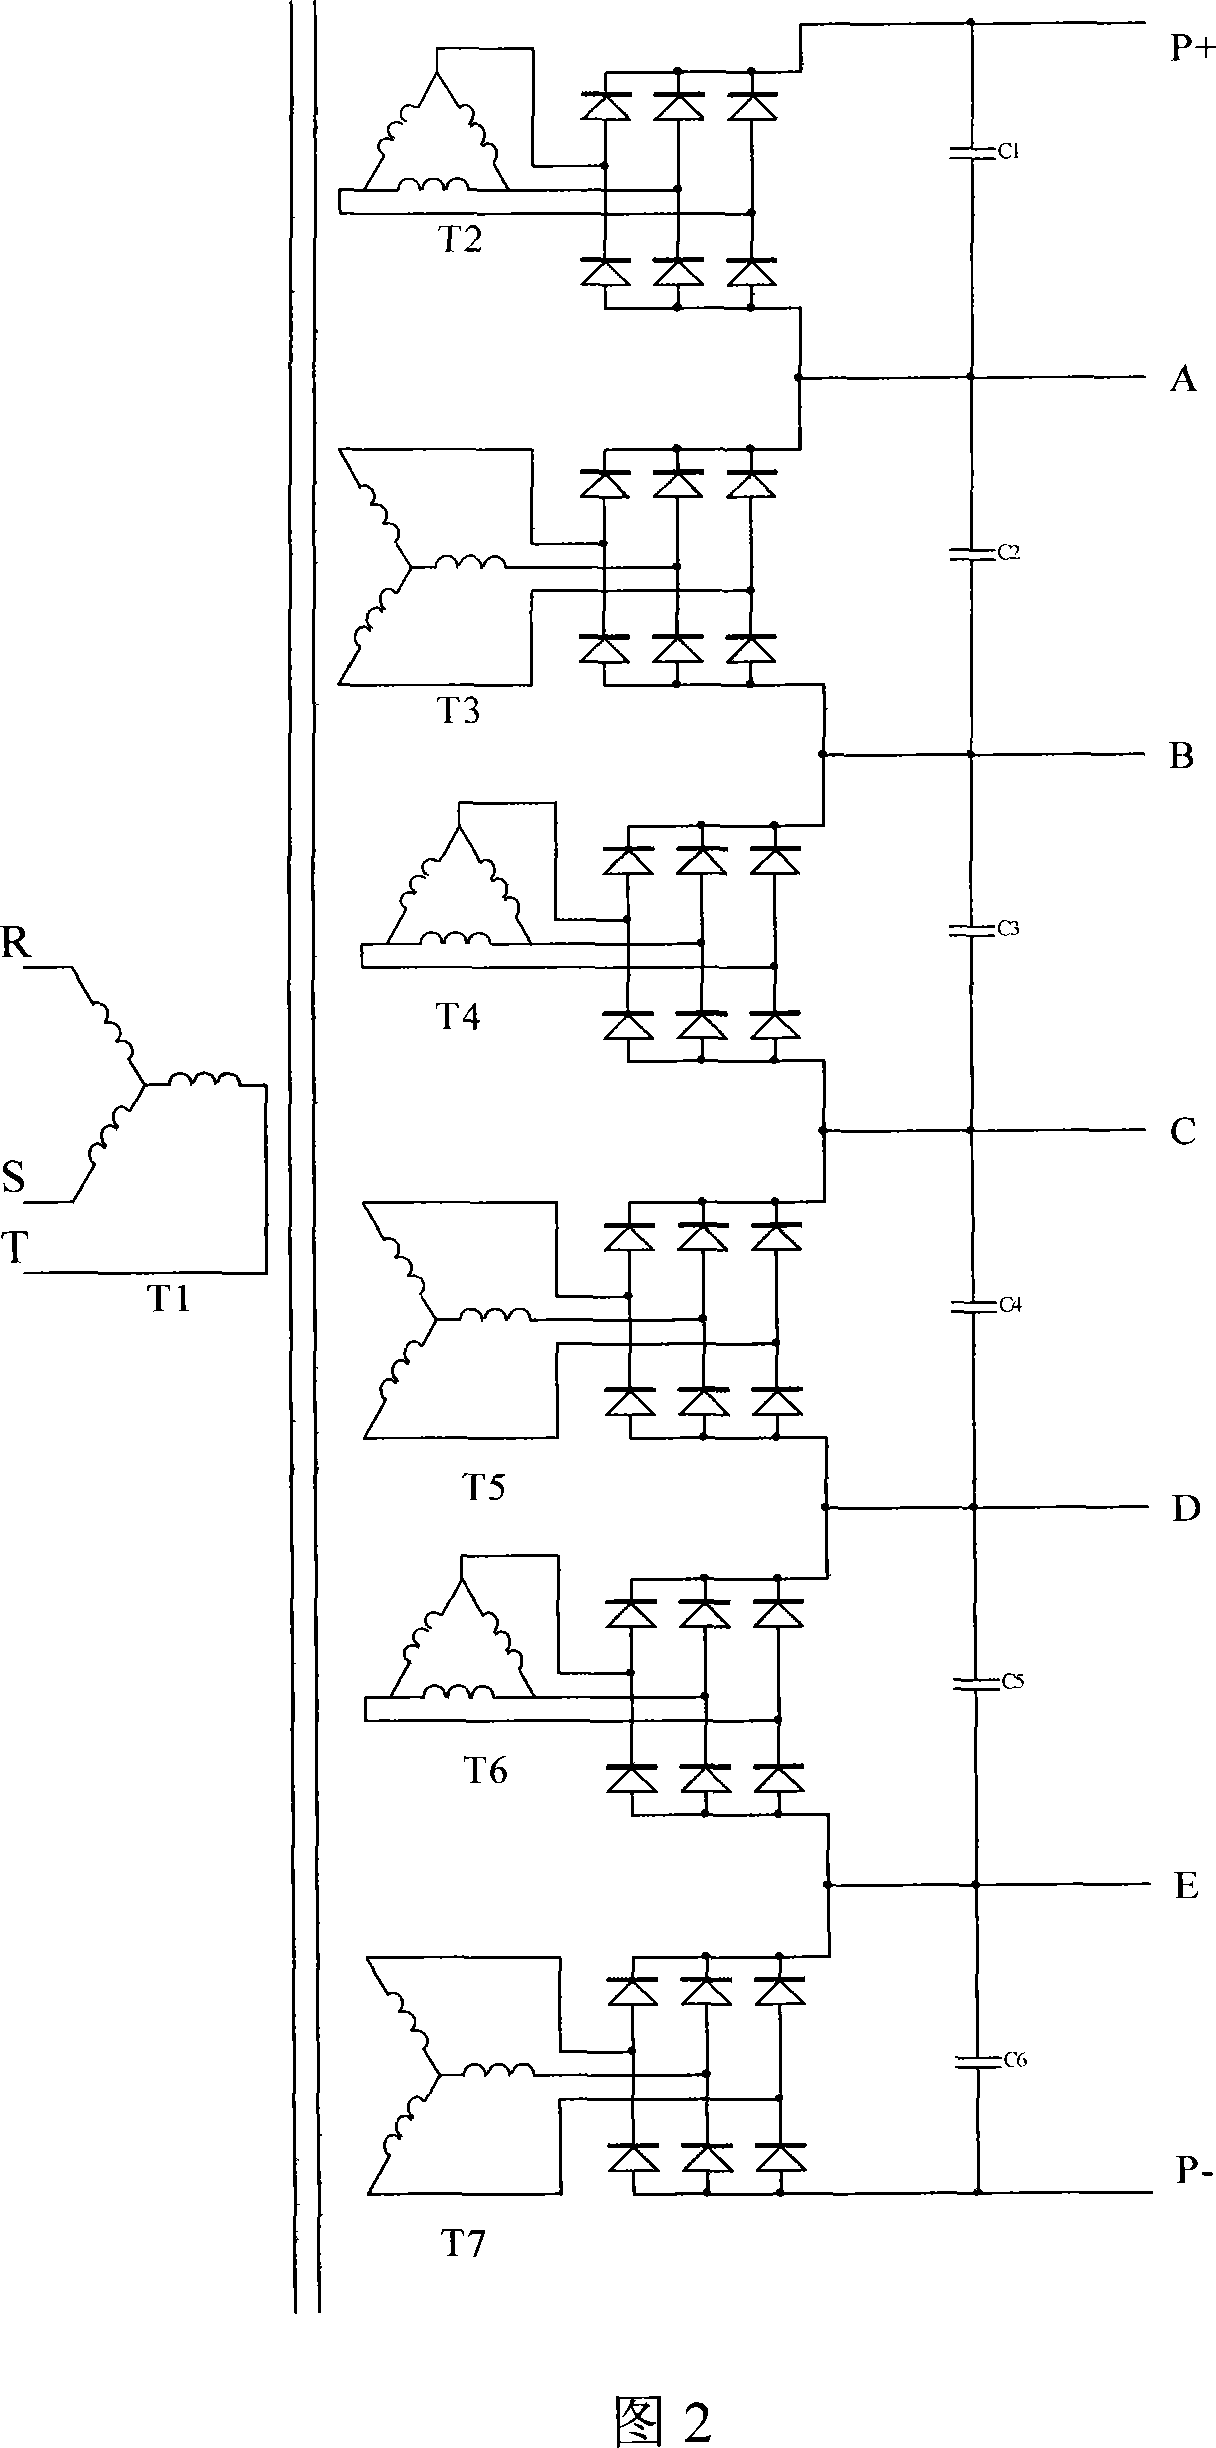 Seven power level high voltage frequency converter